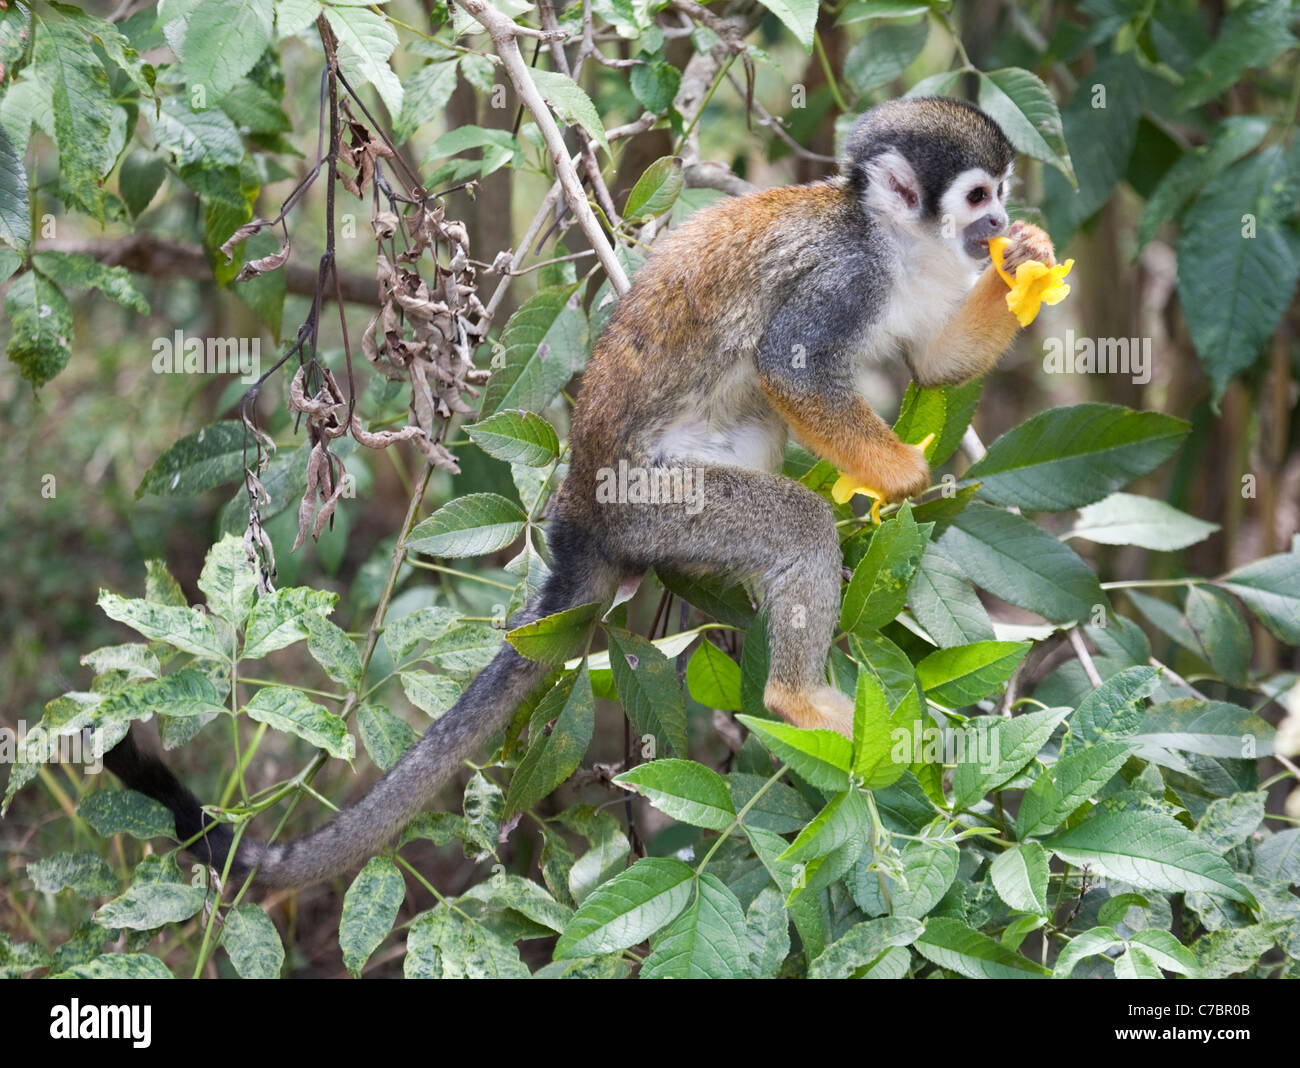 South American Squirrel Monkey (Saimiri sciureus) in forest tree drinking nectar from a flower, Ecuadorian Andes Stock Photo